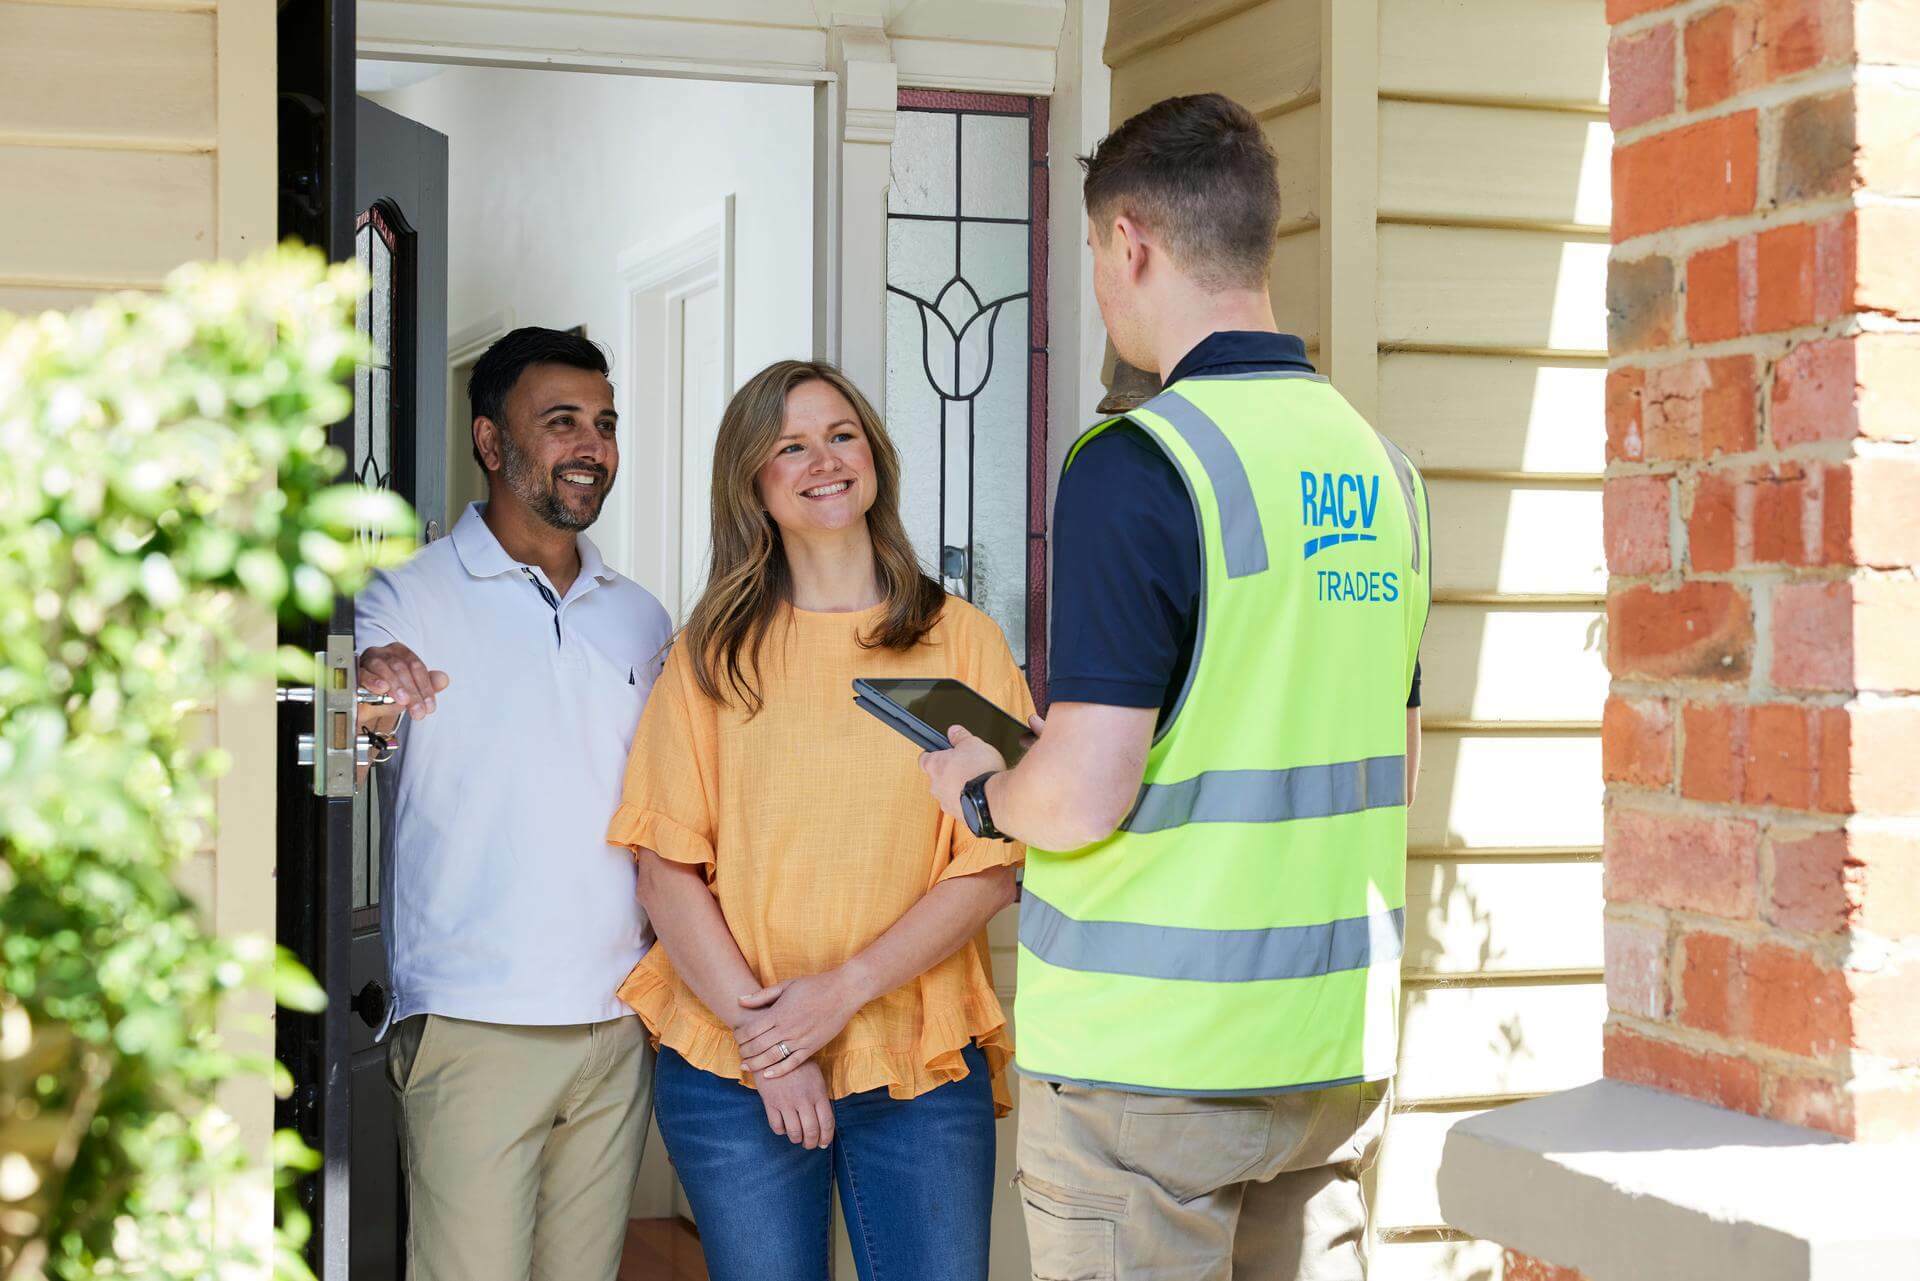 RACV tradesperson holding i Pad at front door with customers